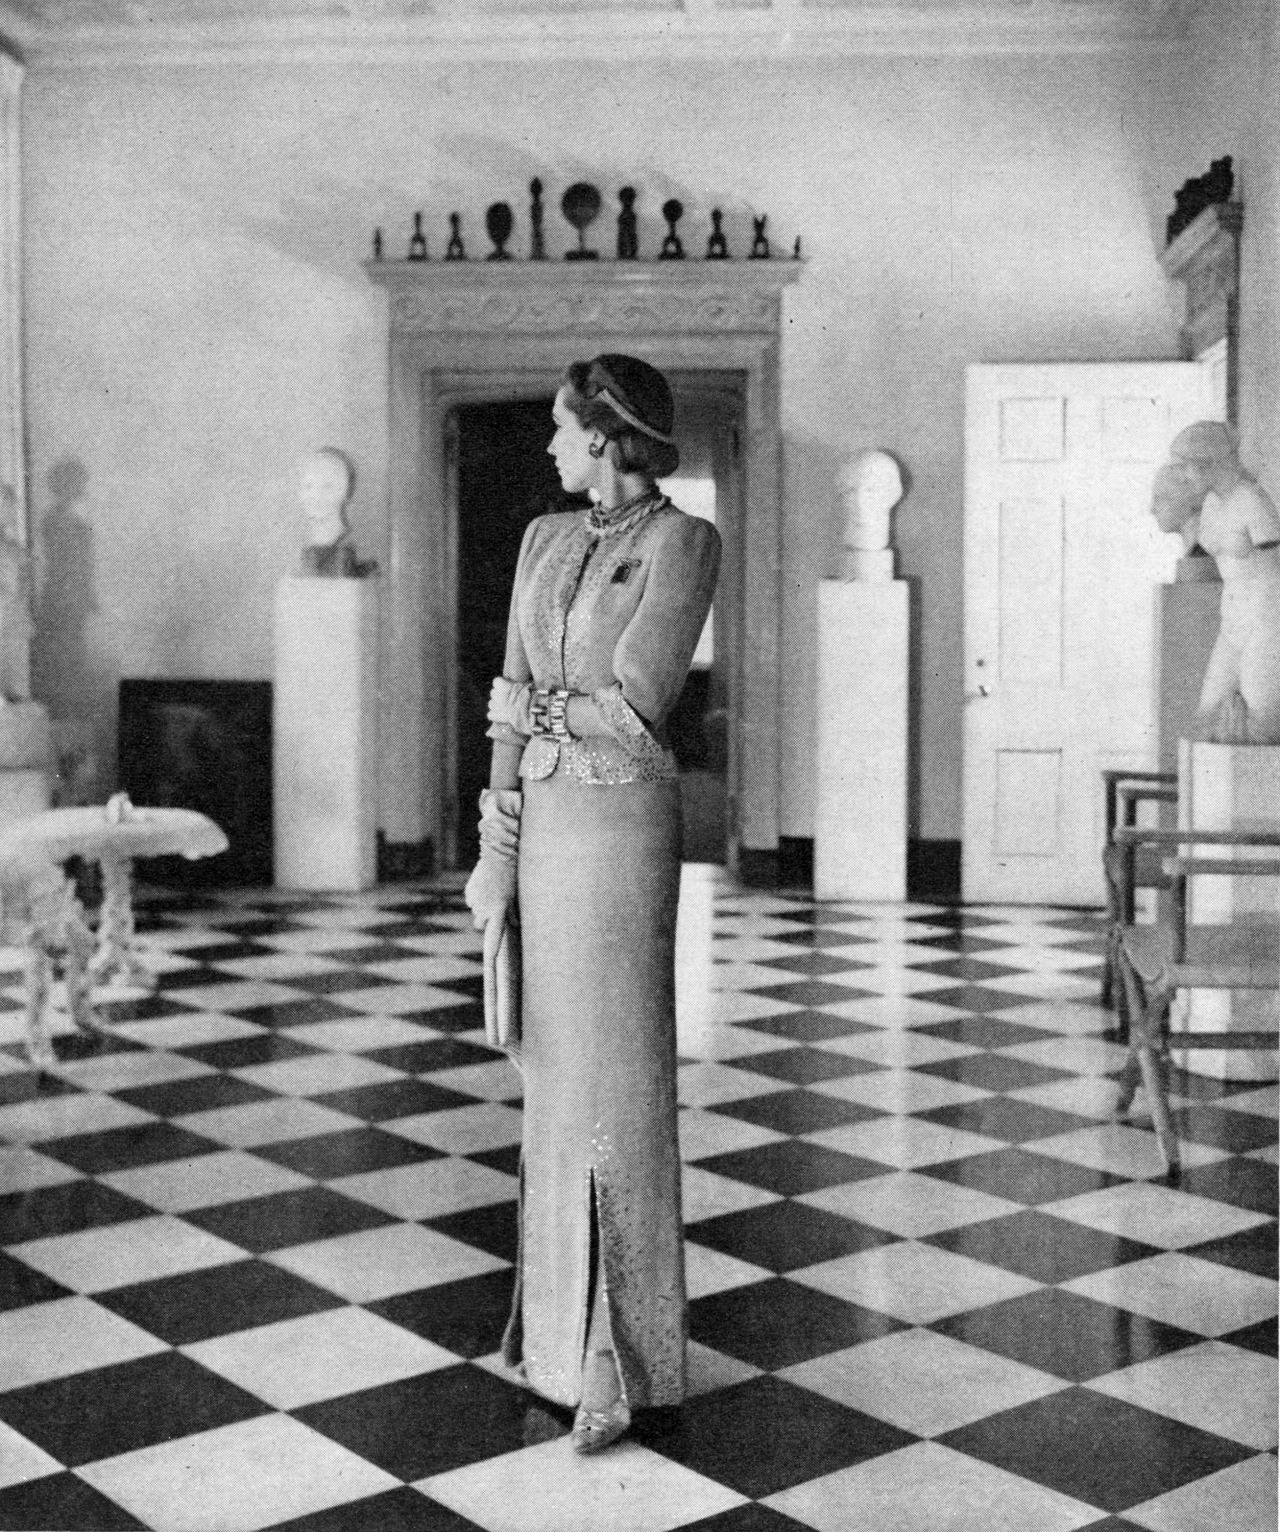 

A fashion shoot for Bergdorf Goodman staged in the foyer of Helena Rubinstein’s New York home at 625 Park Avenue by John Rawlings, 1944

